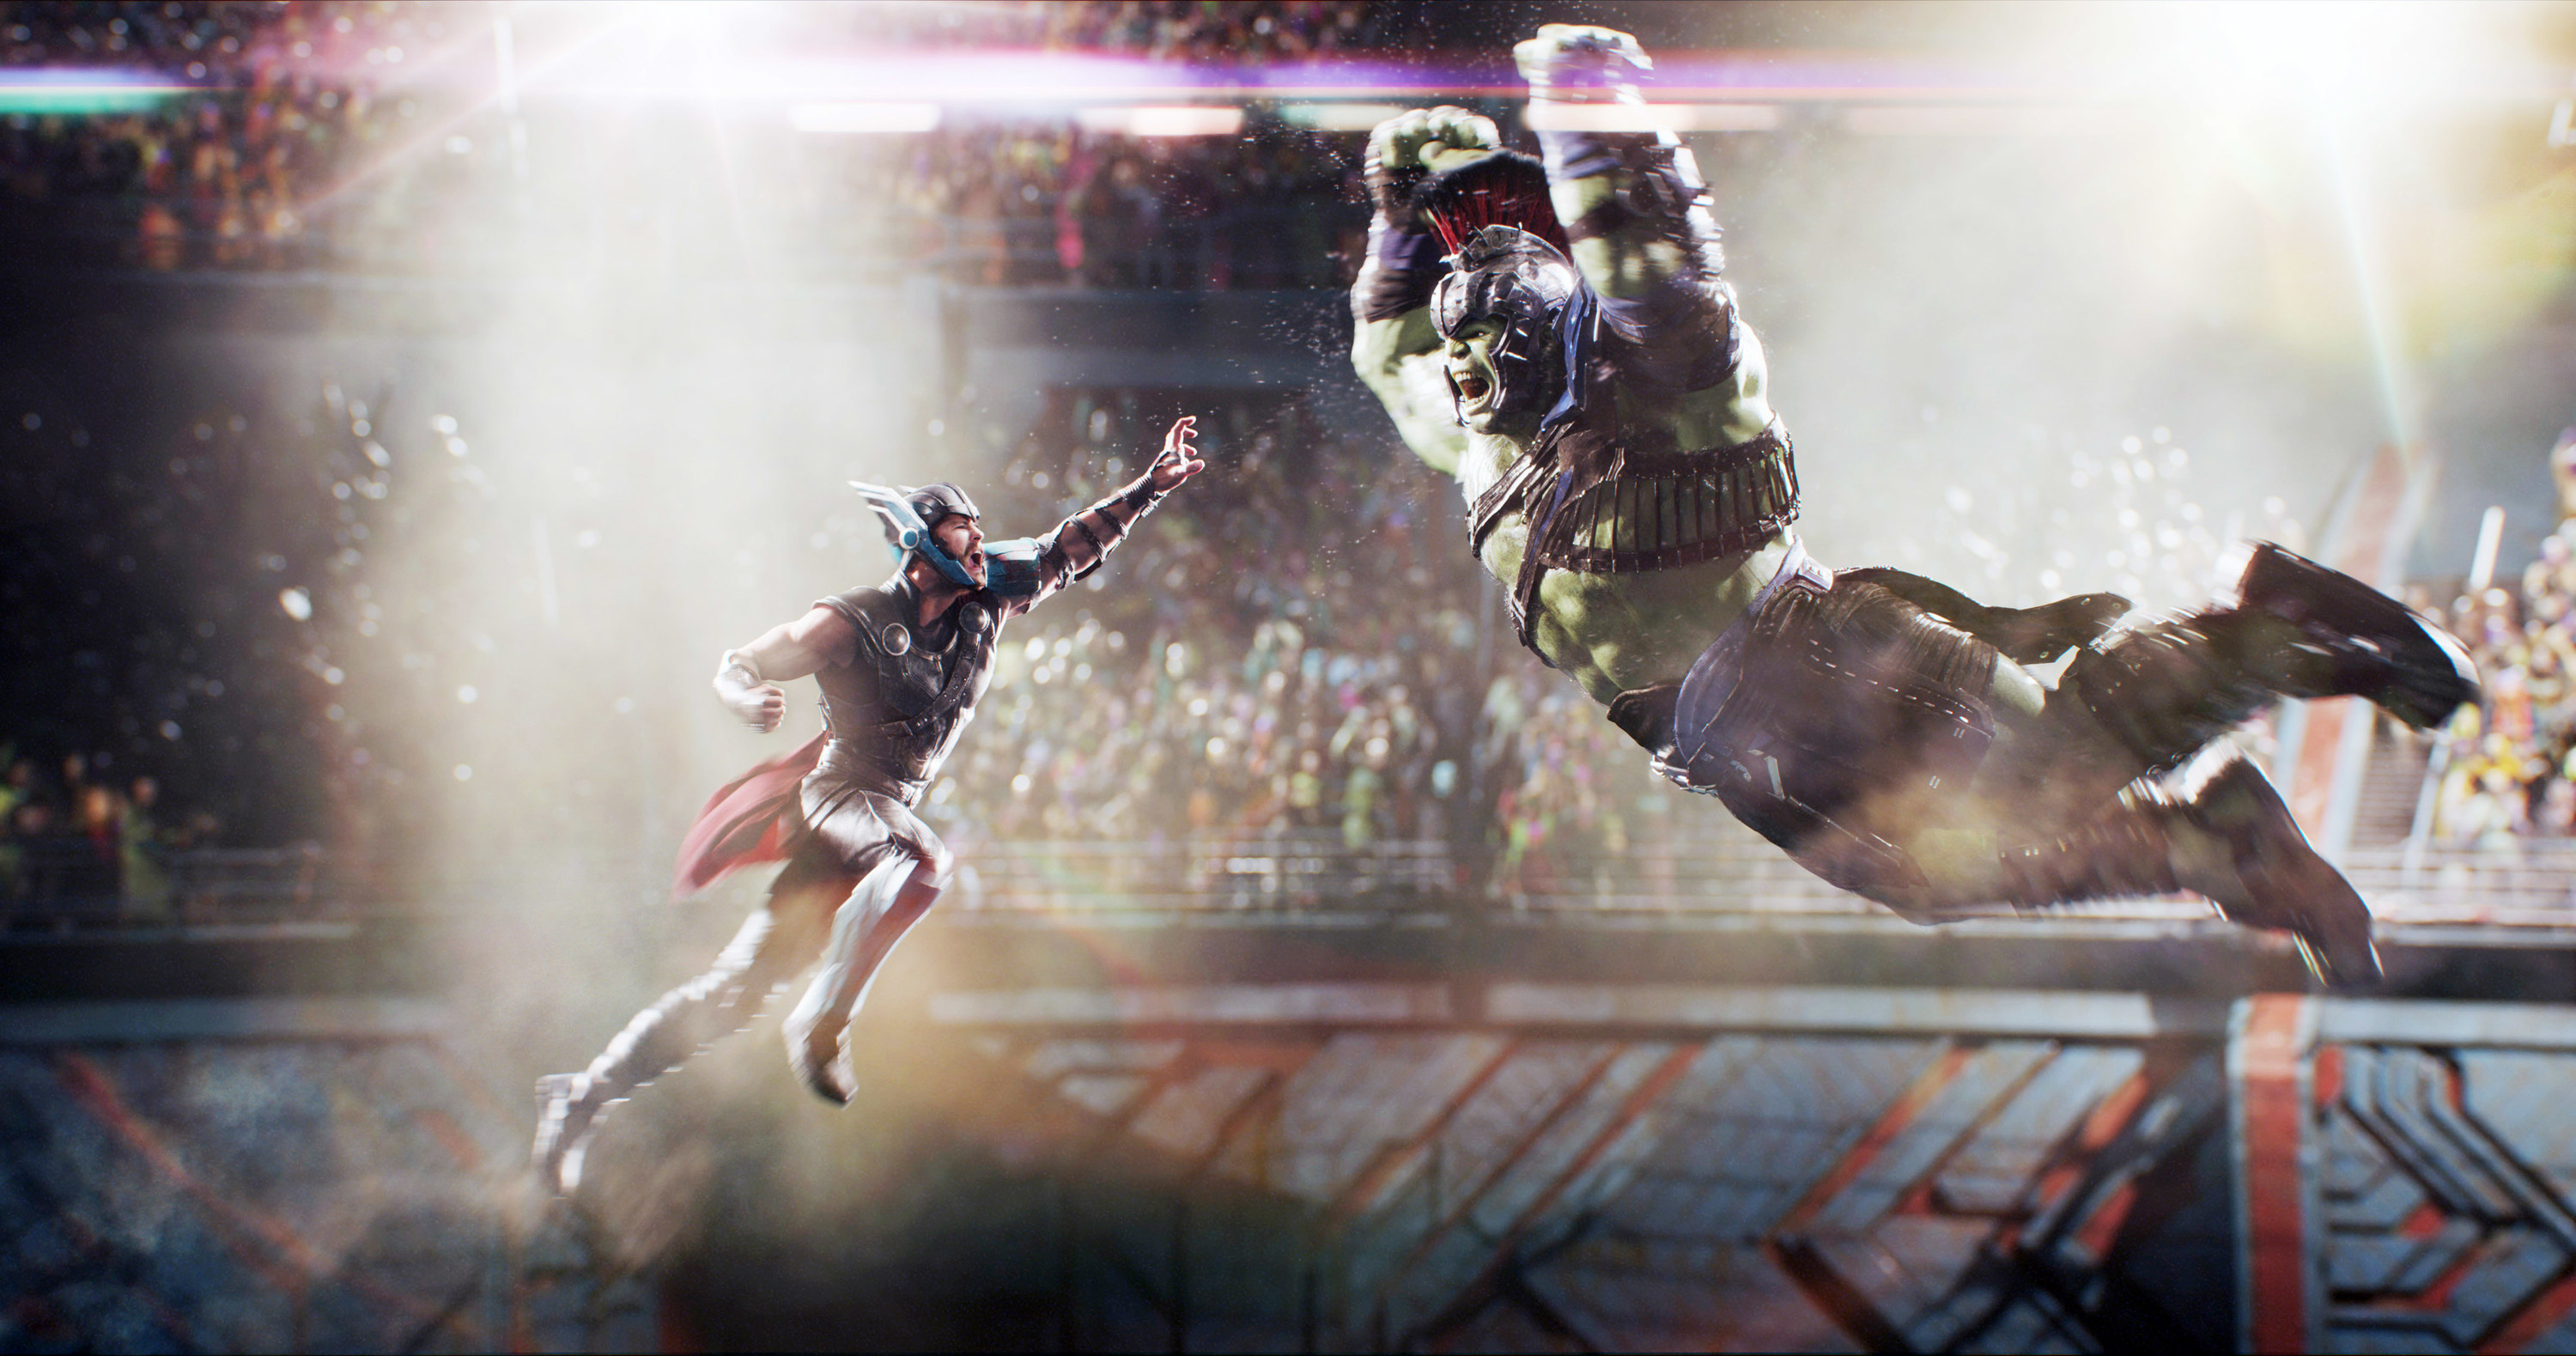 Thor jumps to hit the Hulk